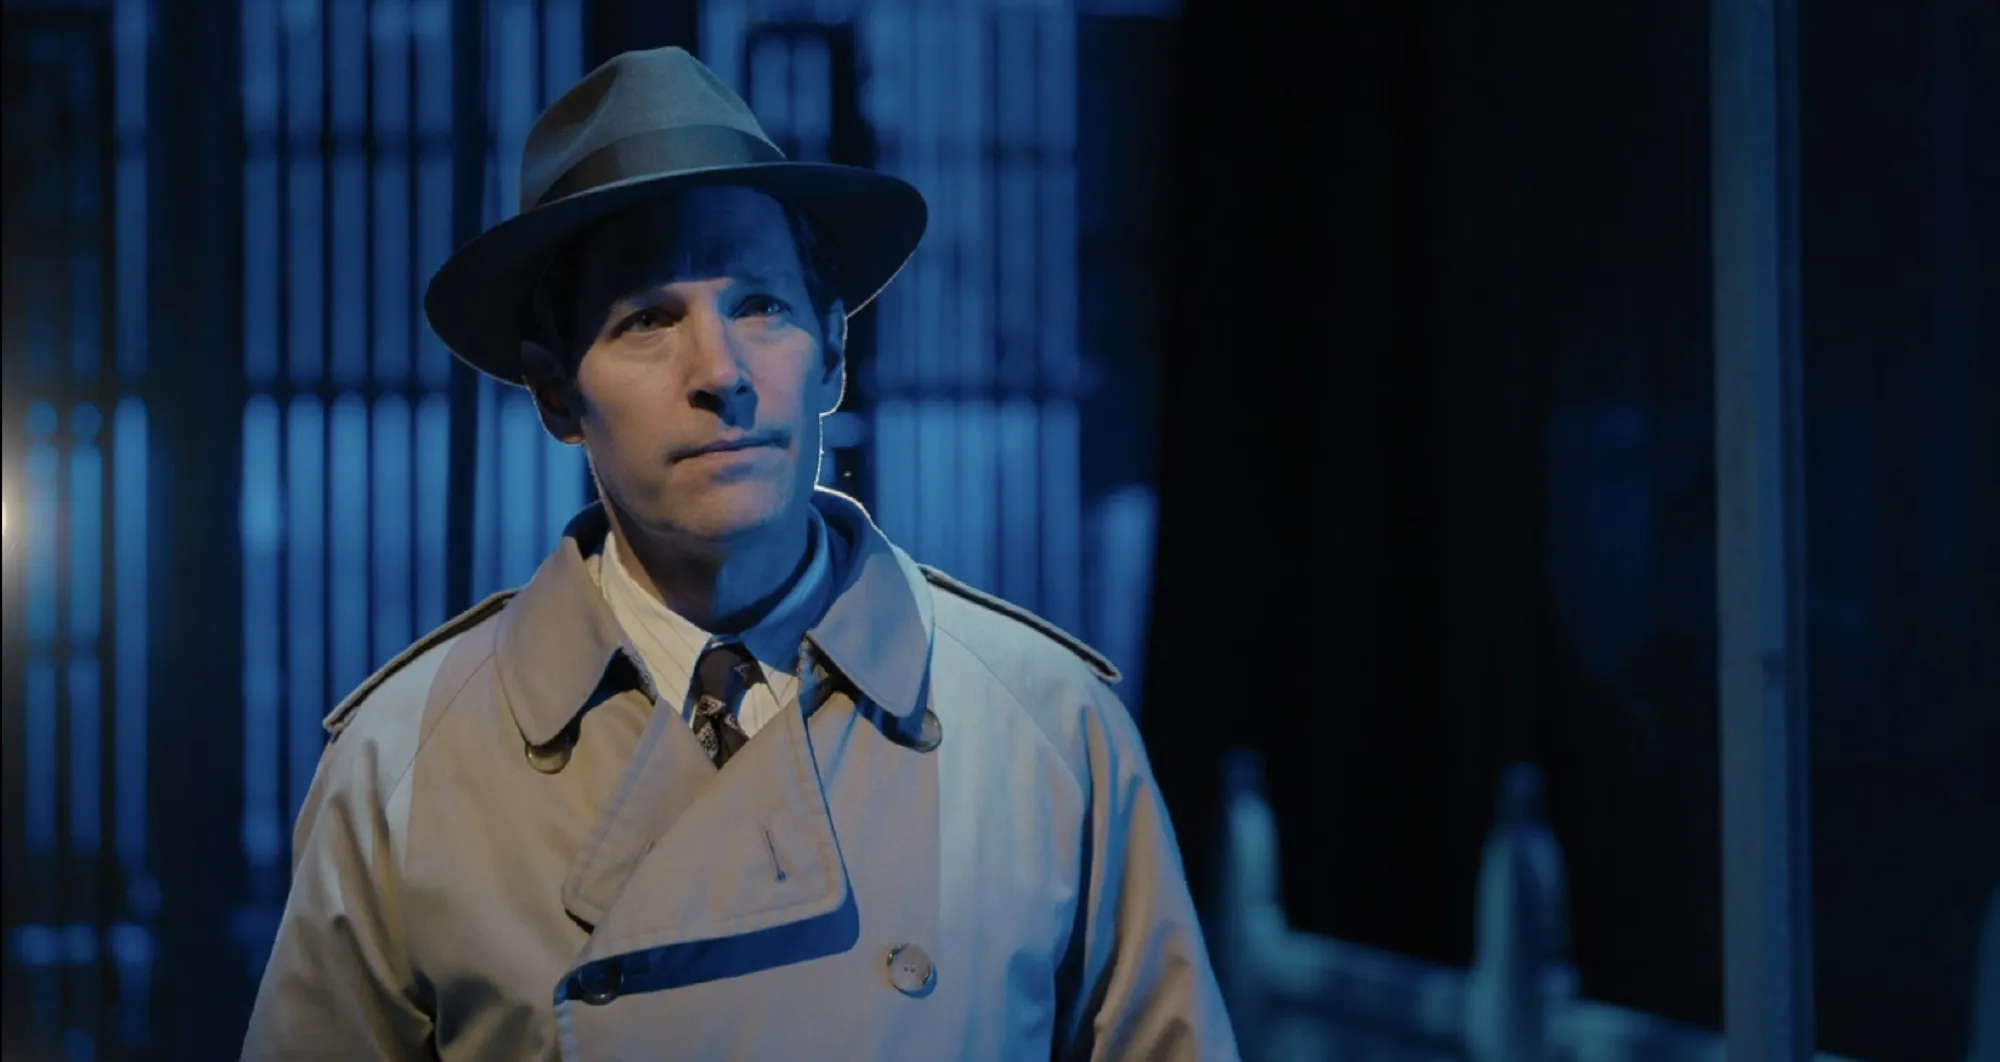 Paul Rudd to join Hulu hit series 'Only Murders in the Building Season 3' | FMV6